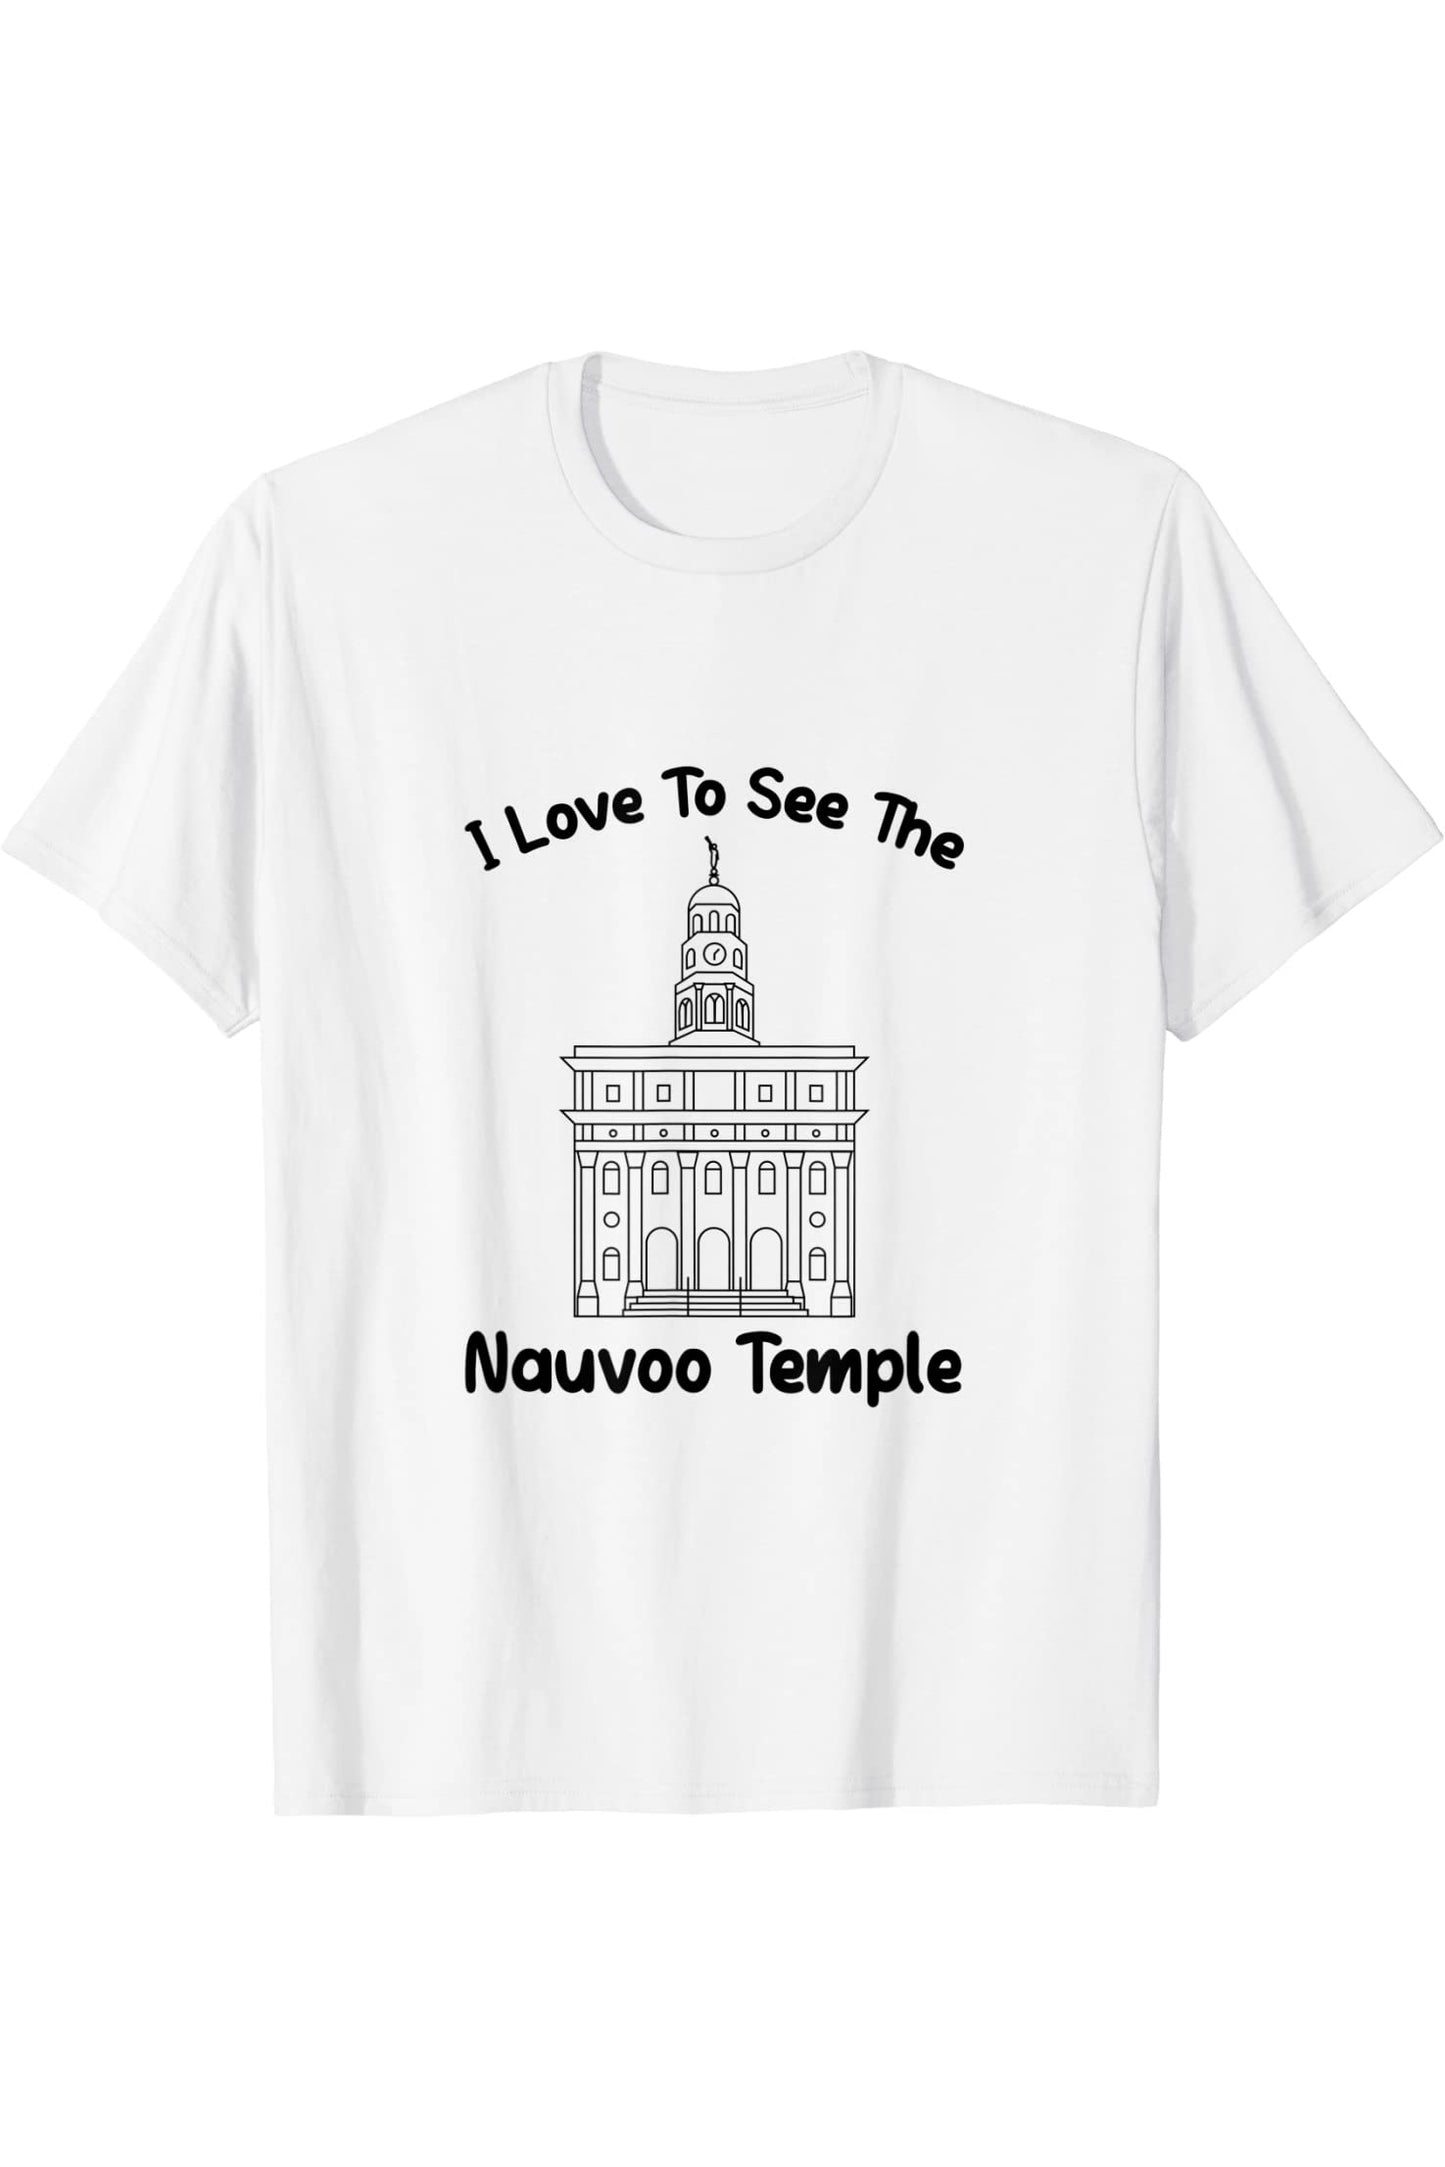 Nauvoo IL Tempel, I love to see my temple, primary T-Shirt